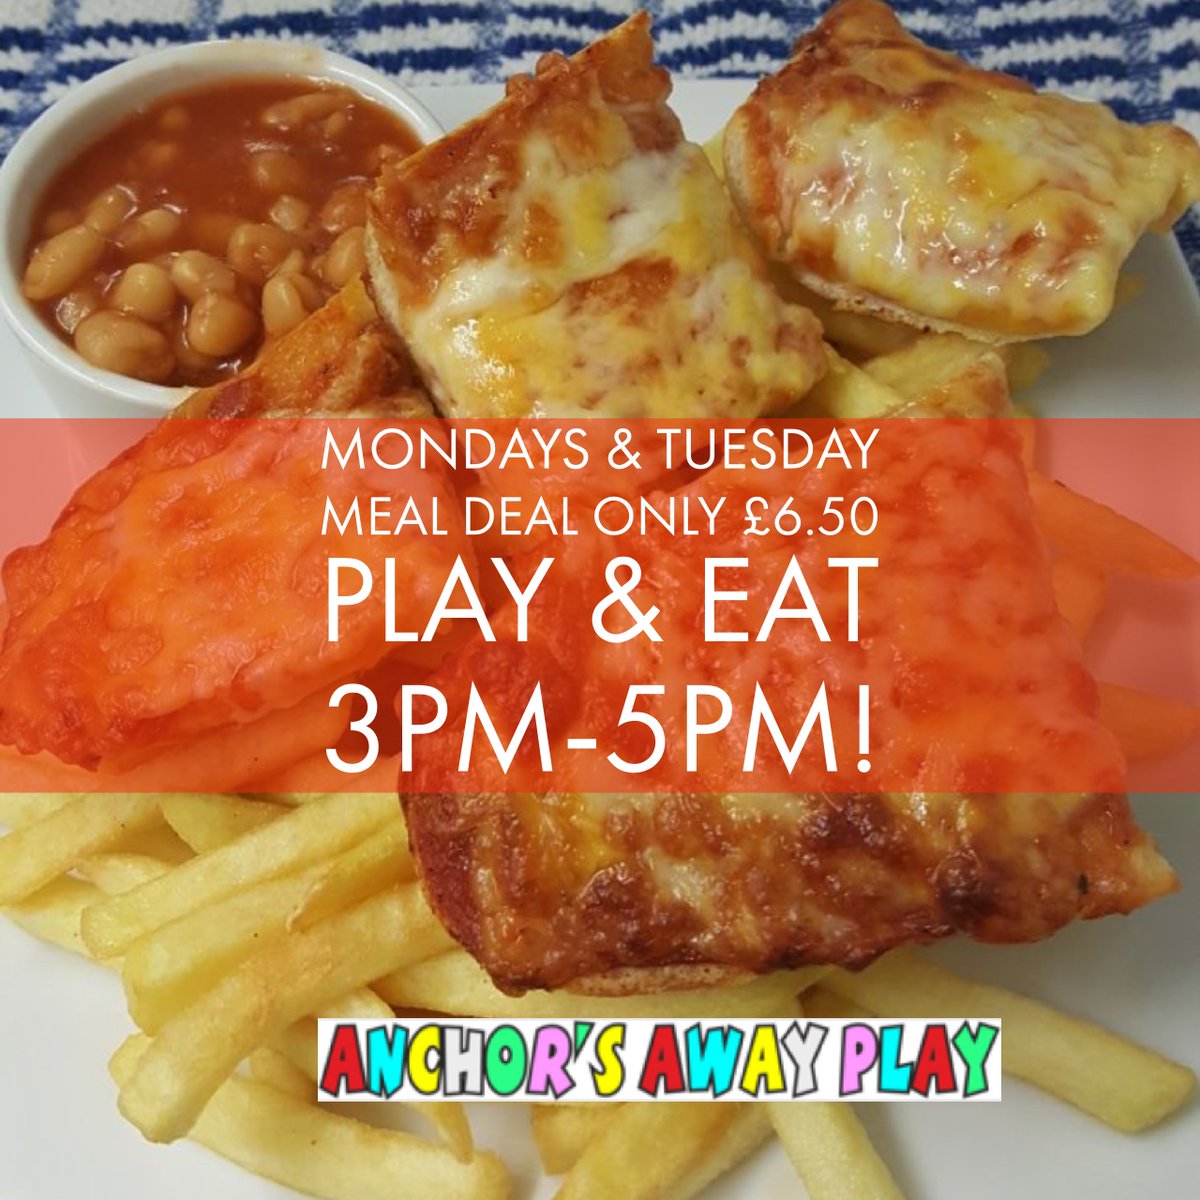 All our meals are freshly prepared, offering nutritious, healthy and delicious food, utilising the only the finest sourced ingredients! #manchesterplay #manchesterfamilies #manchestermums #manchesterdads #mumsnet #mumscommunity #dadlife #manchesterchildren #manchesterkids #kids